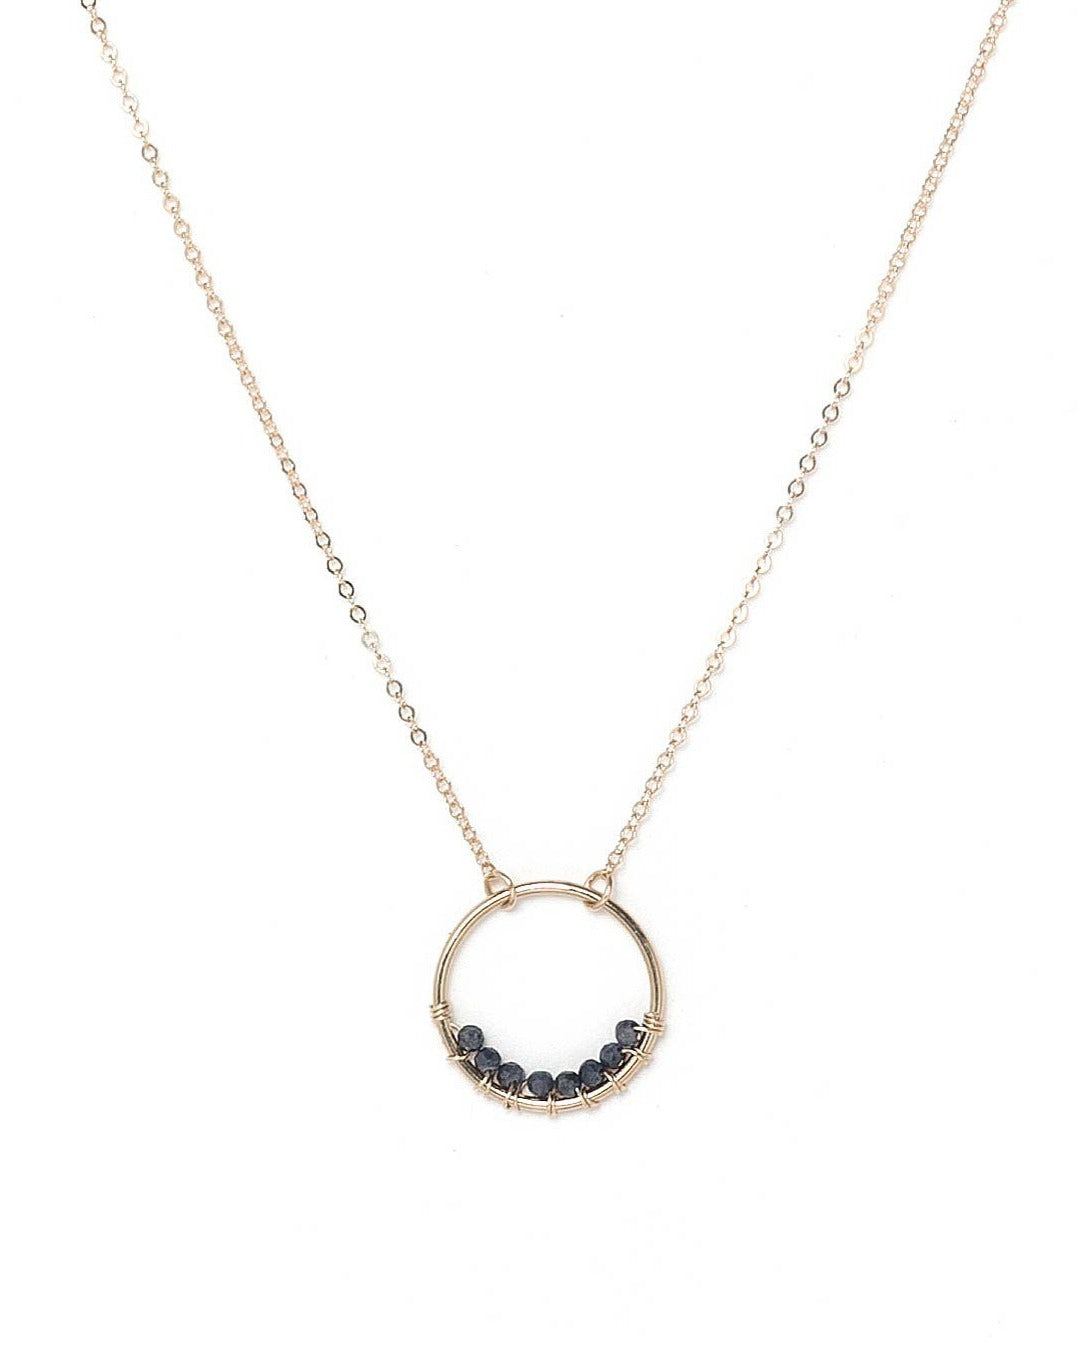 Curra Necklace by KOZAKH. A 16 to 18 inch adjustable length necklace in 14K Gold Filled, featuring a ring with 2mm faceted round Sapphire gems.